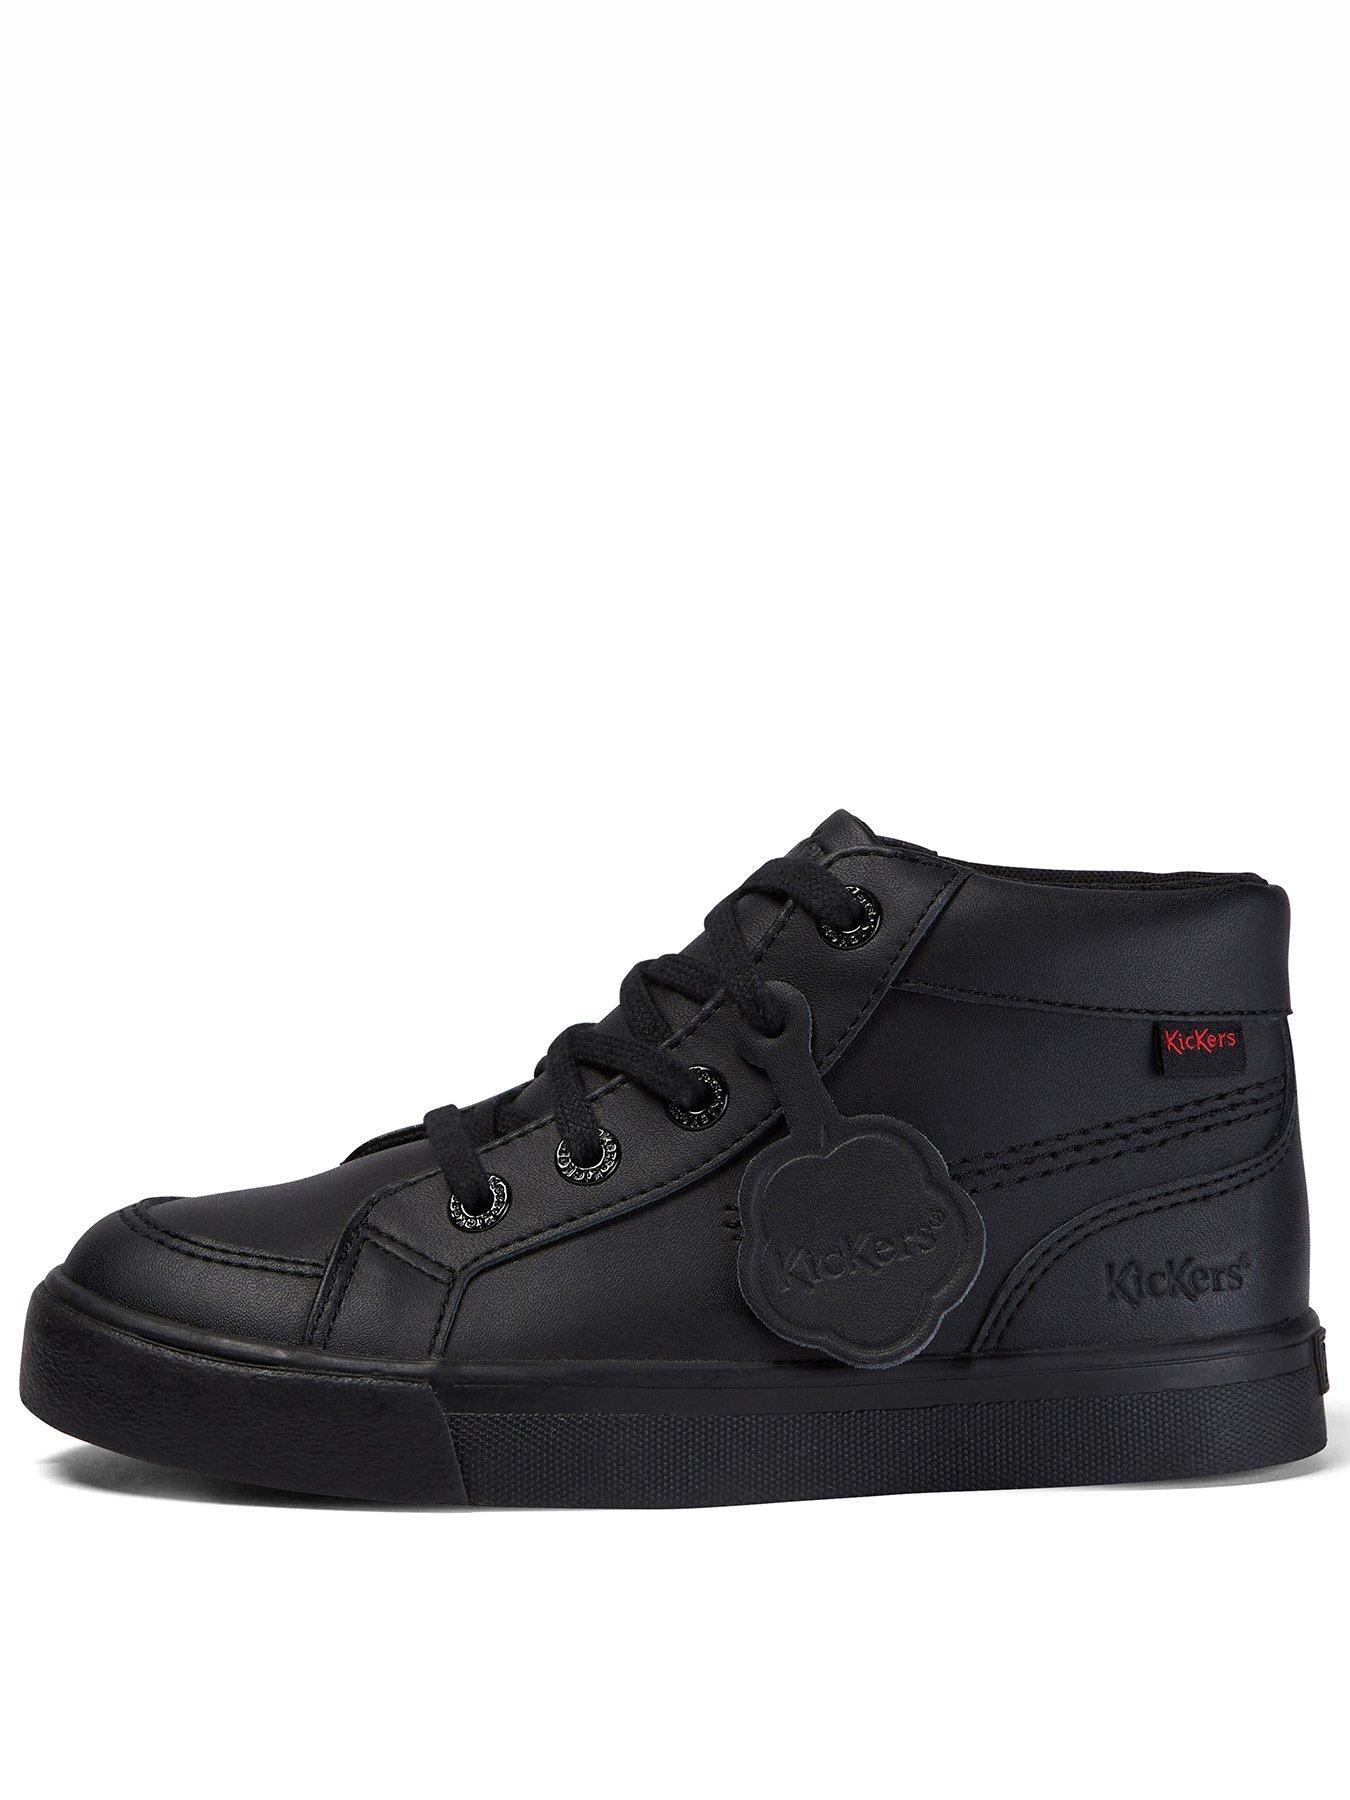 Kickers Tovni Hi Top Leather Lace Up | very.co.uk